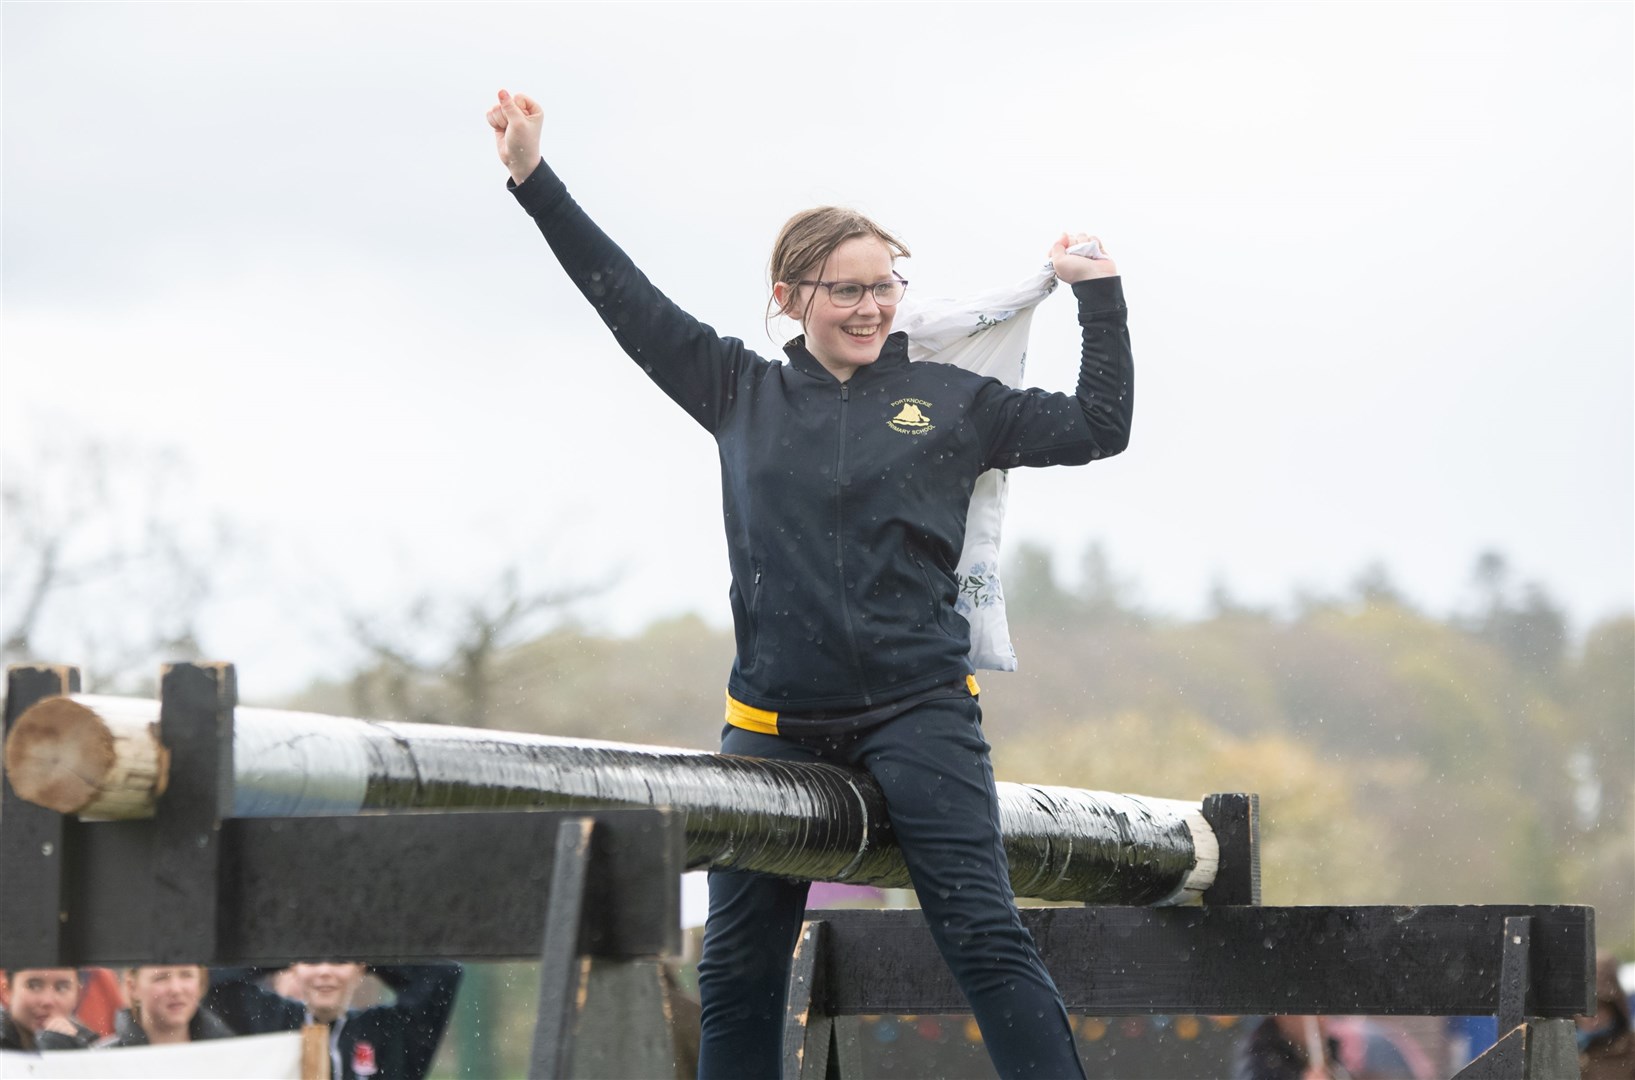 Joy for Portknockie Primary pupil Leisha Kenn, who won the slippery pole competition. Picture: Daniel Forsyth.